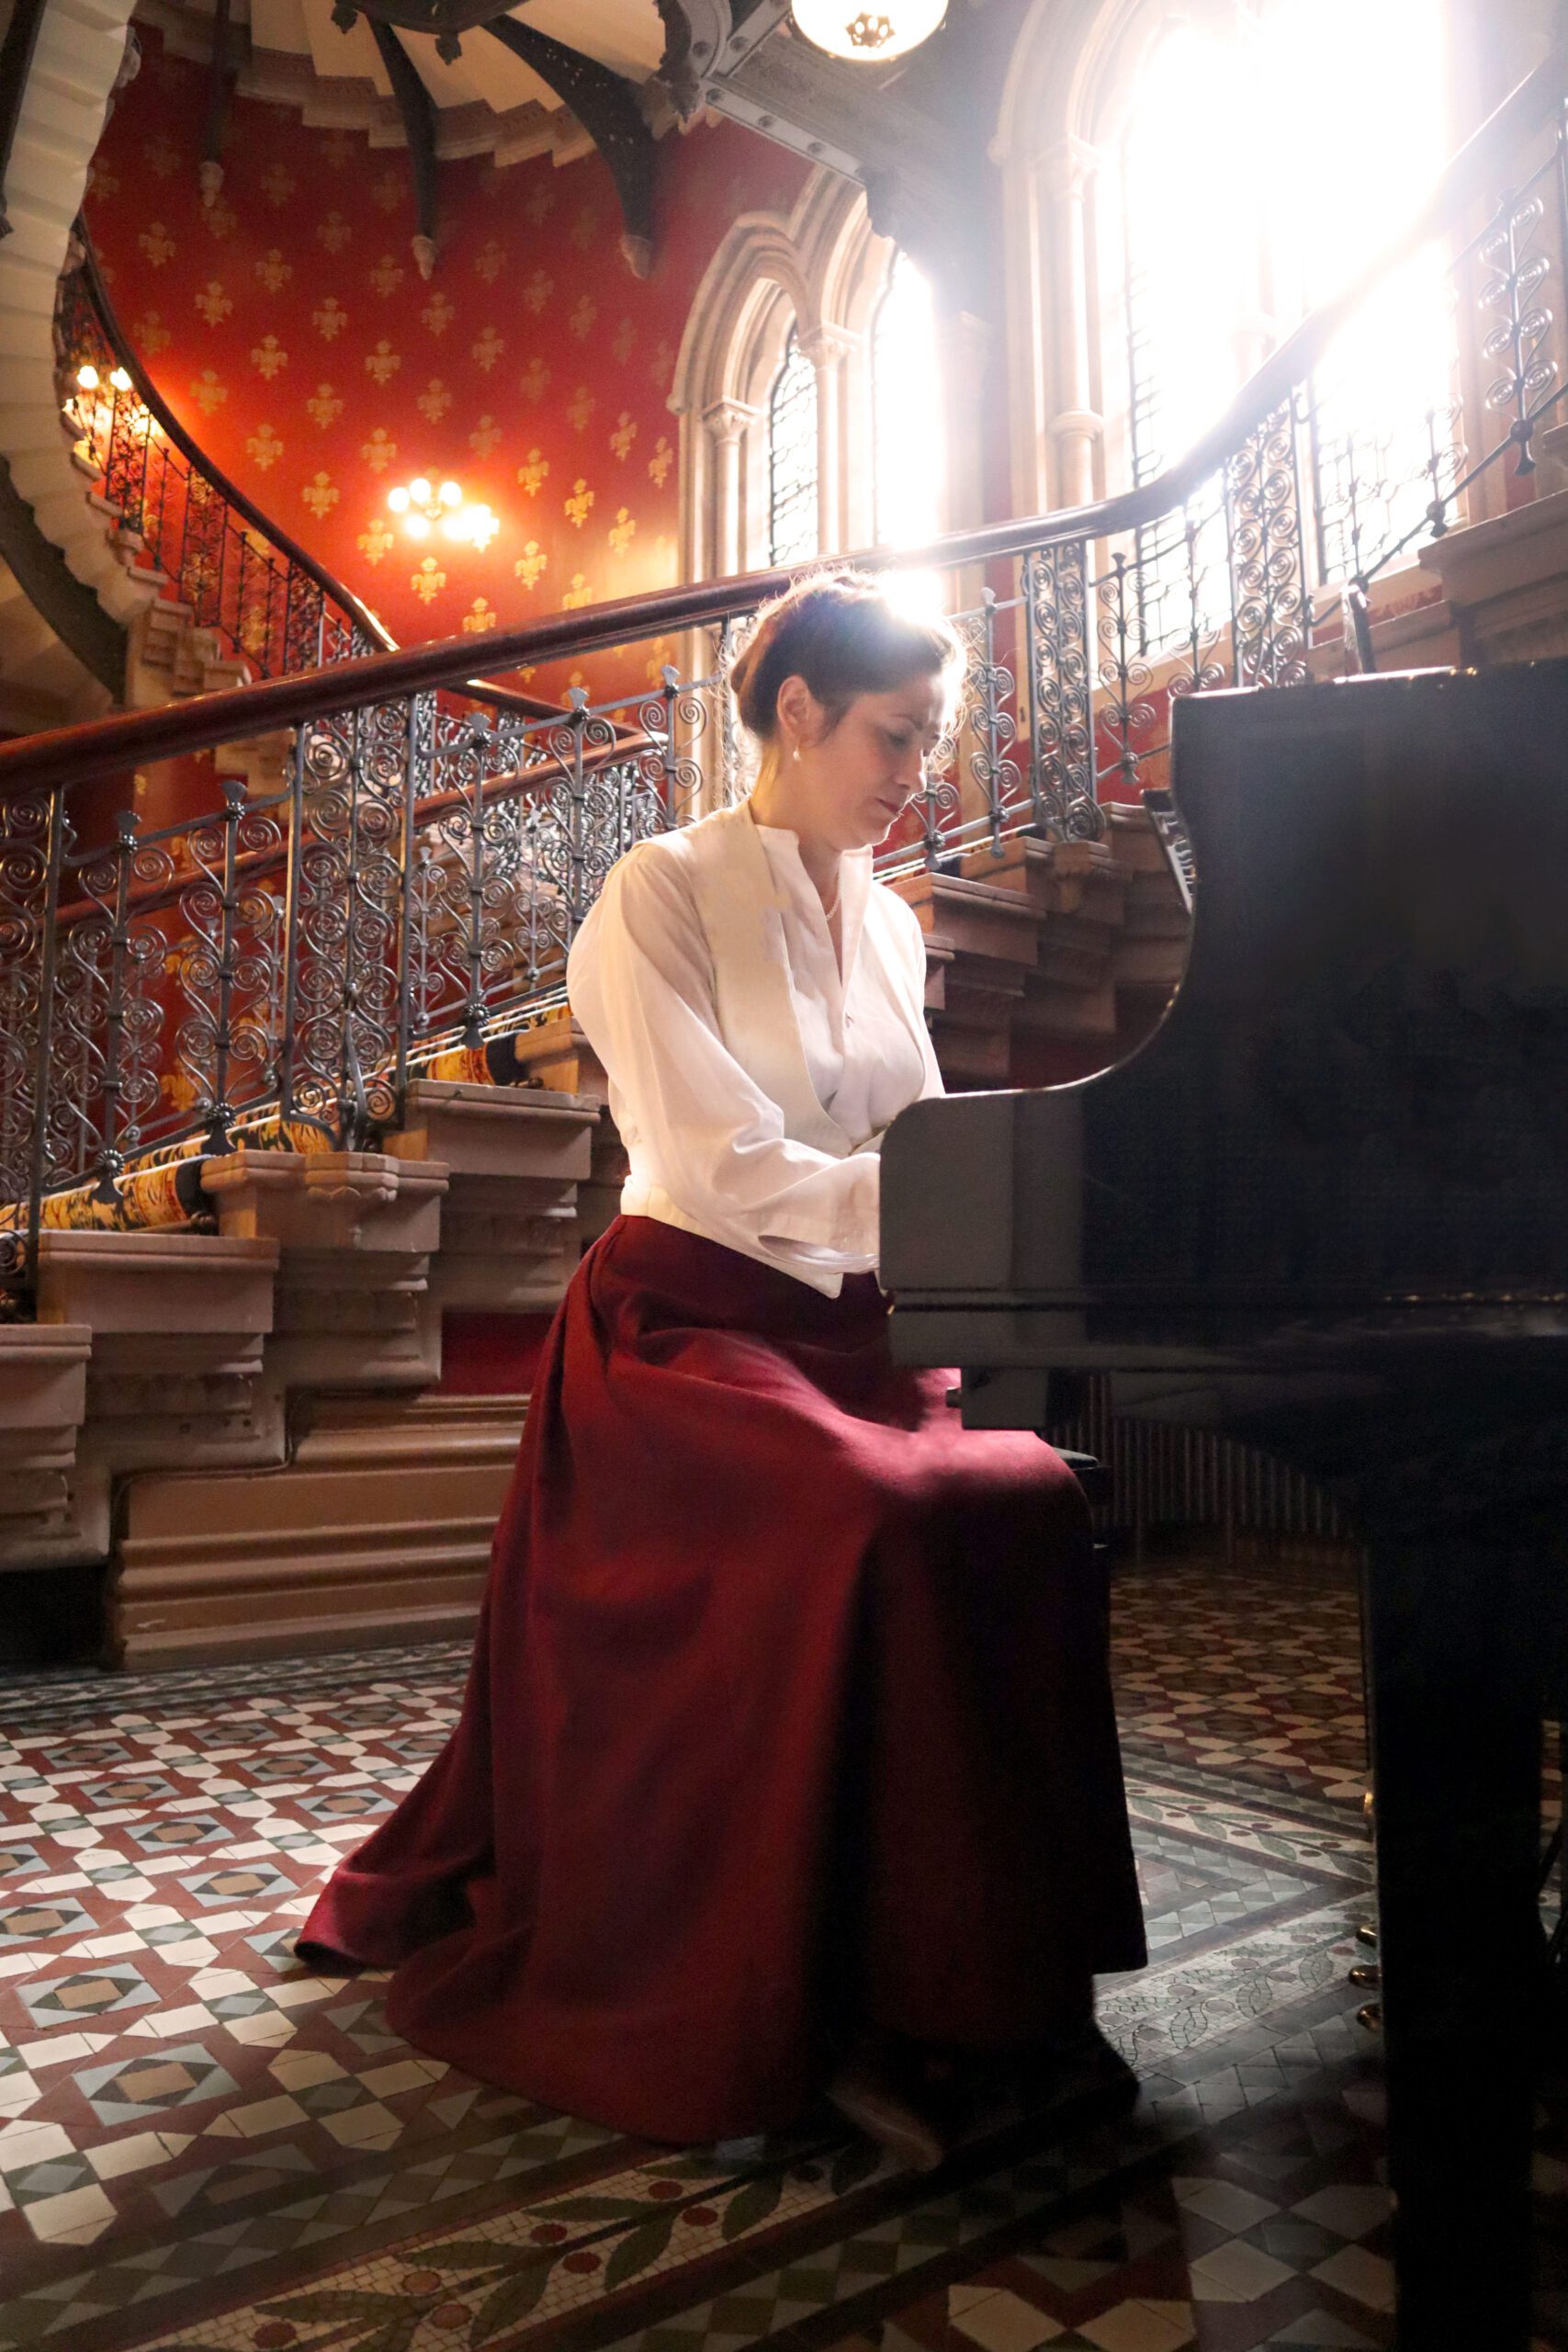 Cathy Hay in a red walking skirt, pretending to play the piano